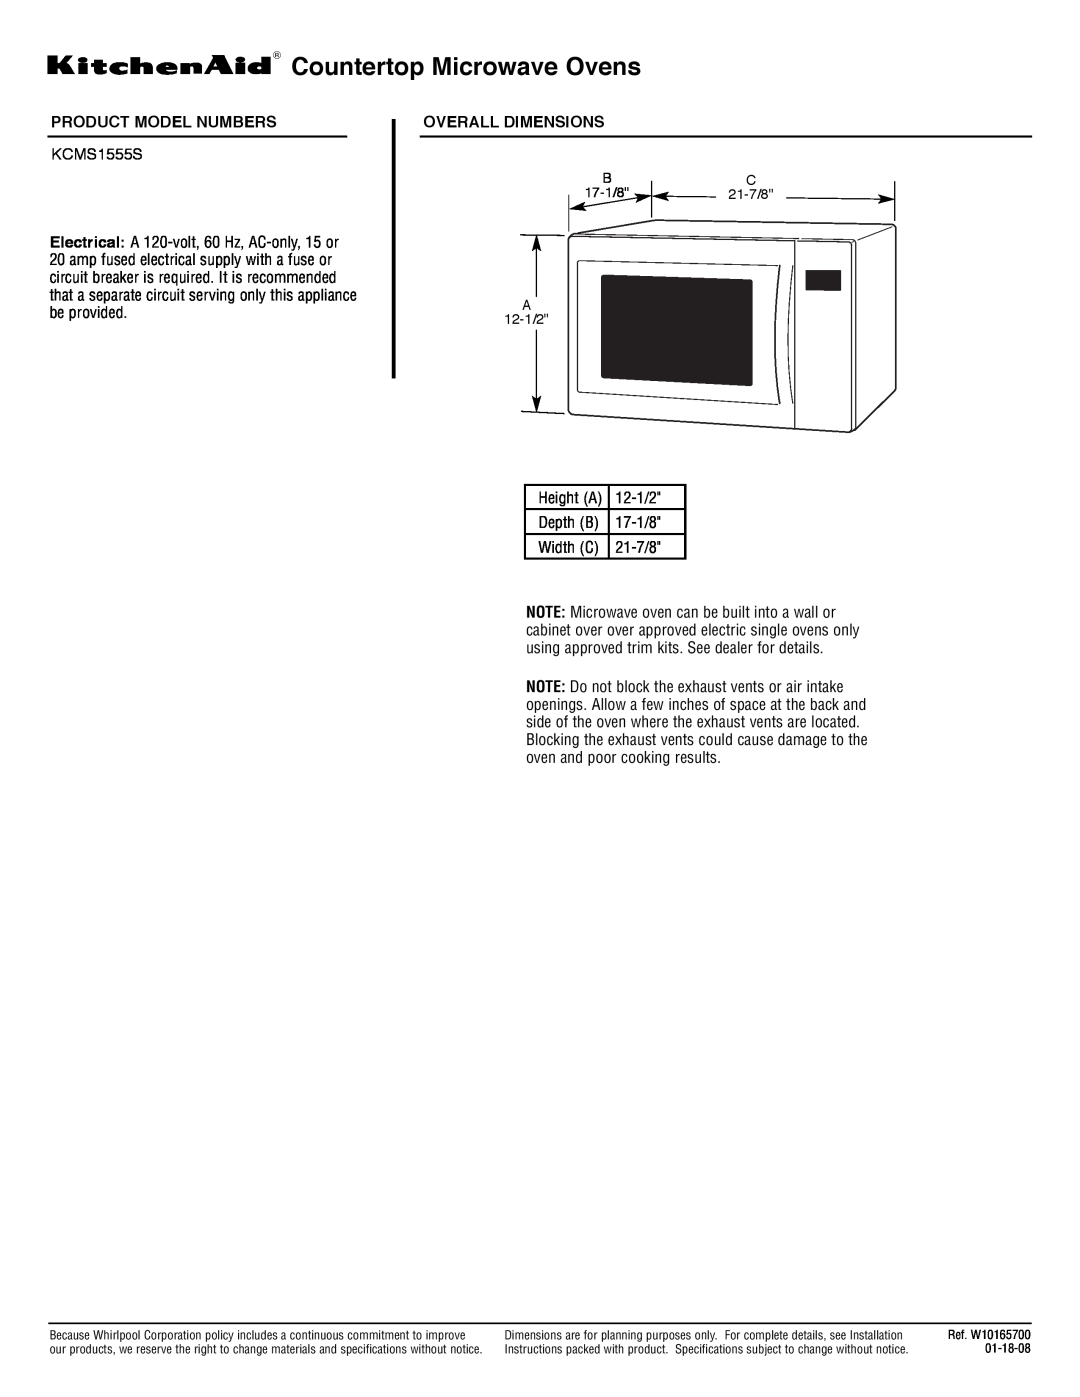 KitchenAid KCMS1555S dimensions Countertop Microwave Ovens, Product Model Numbers, Overall Dimensions, Depth B, Width C 